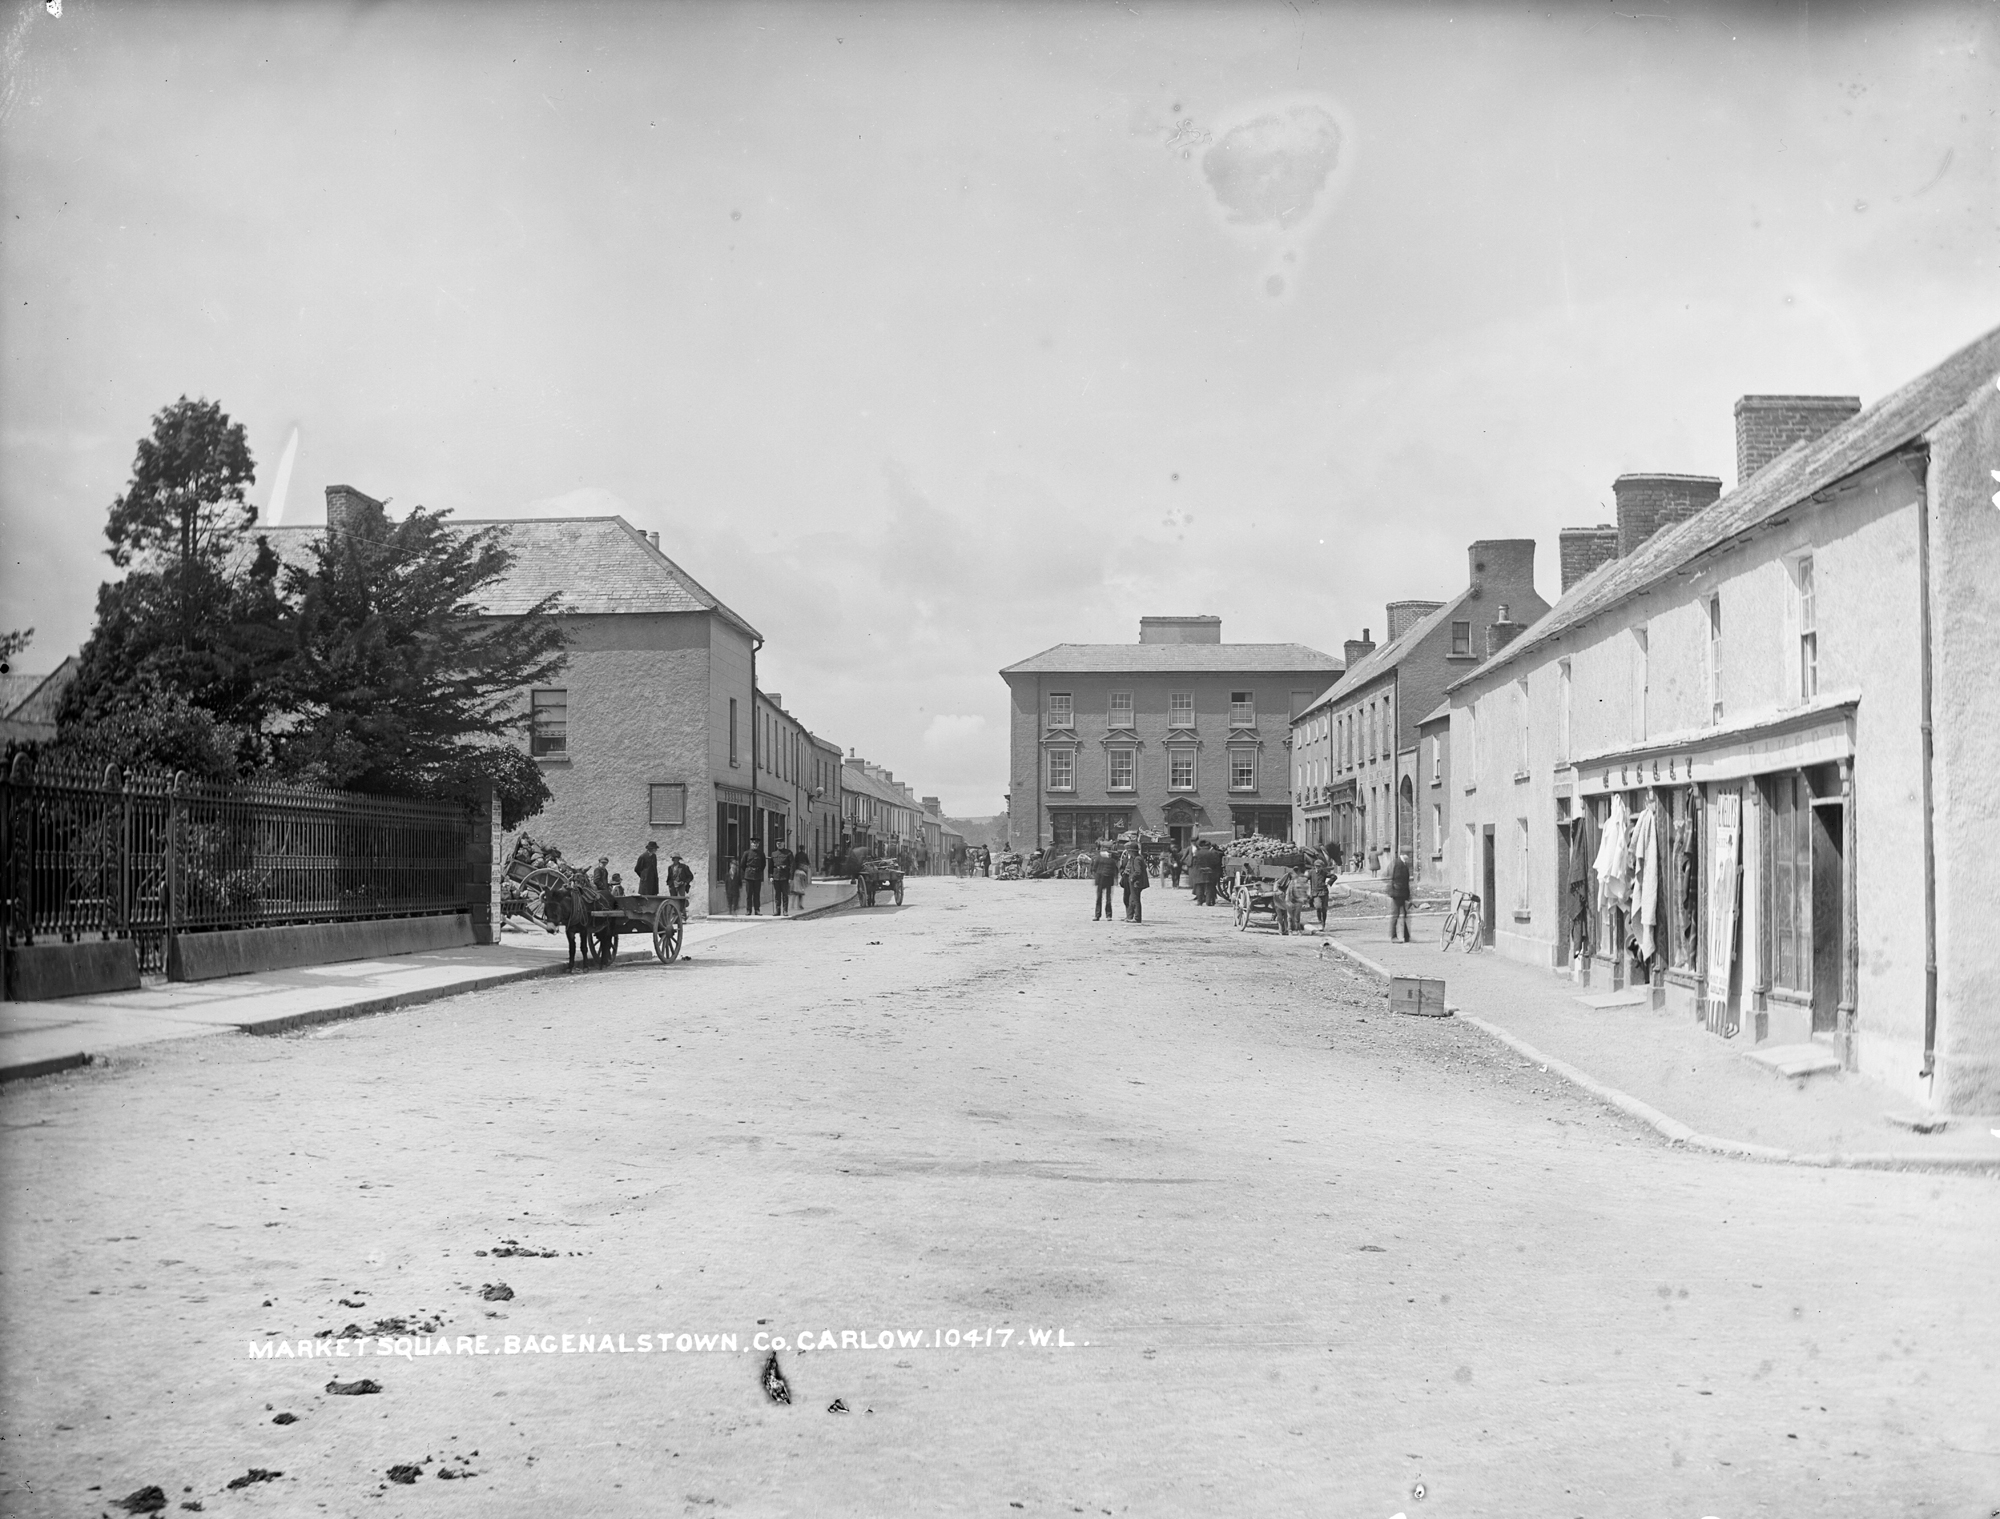 Market Square, Bagenalstown, Co. Carlow, late 19th century (7254204326)